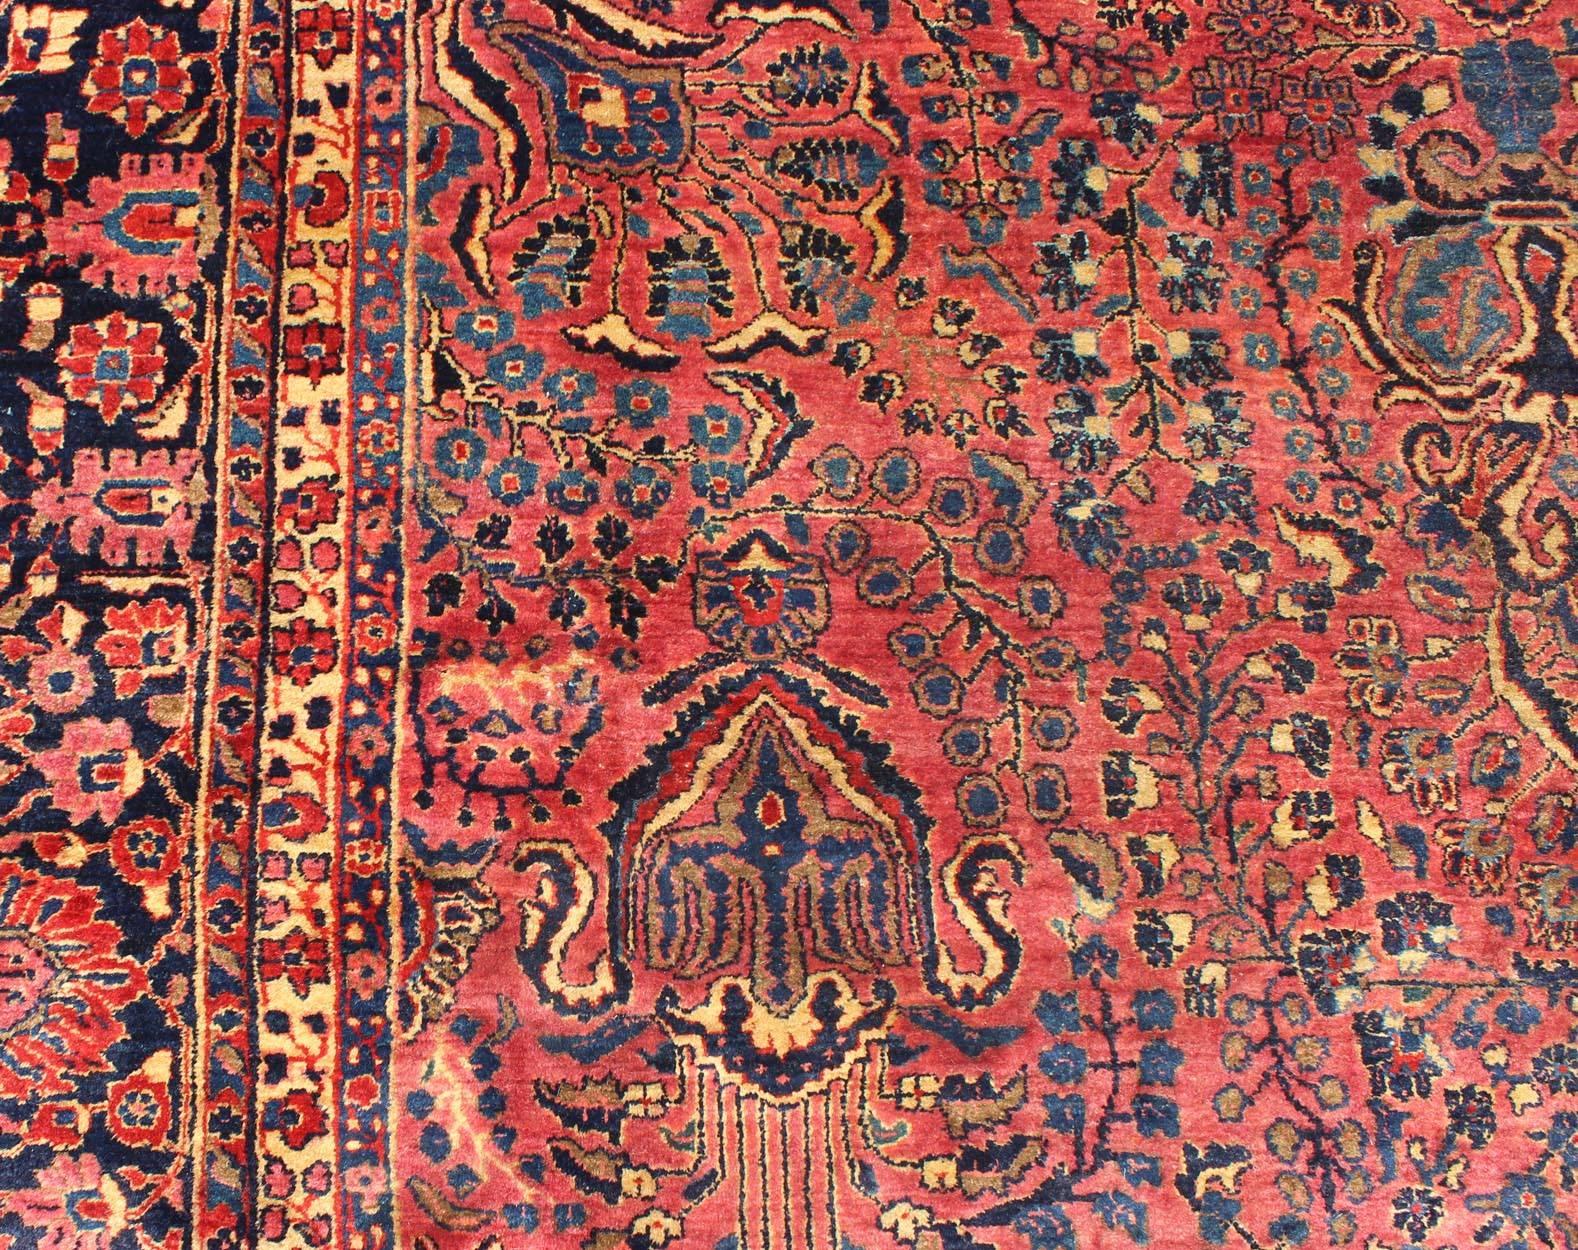 Wool Antique Persian Sarouk Carpet with Deep Cranberry Field and Floral Elements